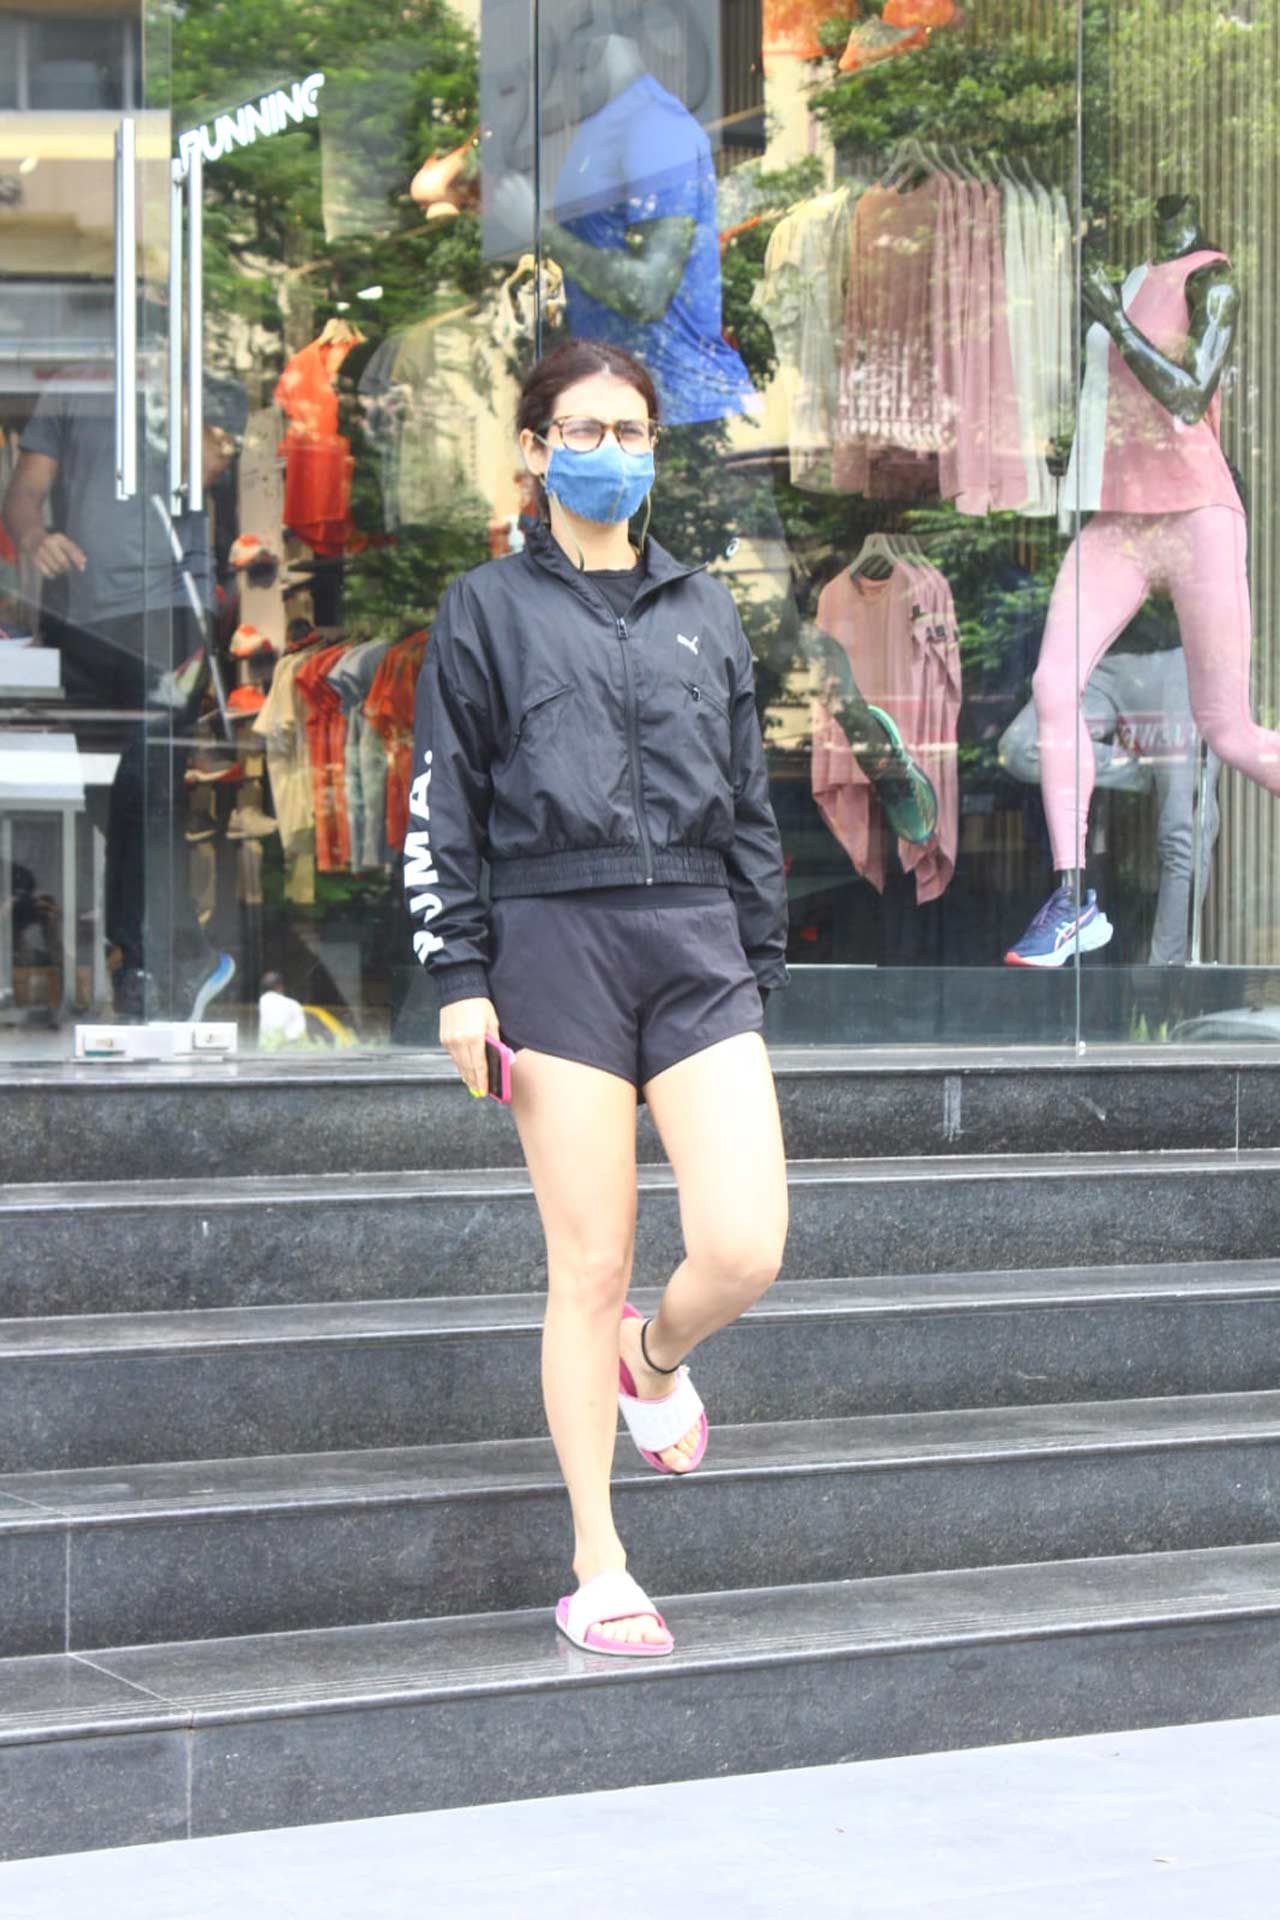 Fatima Sana Shaikh was snapped at a shopping store in Bandra, Mumbai. Dressed in monochrome athleisure, the actress flaunted her casual side when clicked in the city. Speaking about her professional commitments, the actress was last seen in Anurag Kashyap's 'Ludo'.